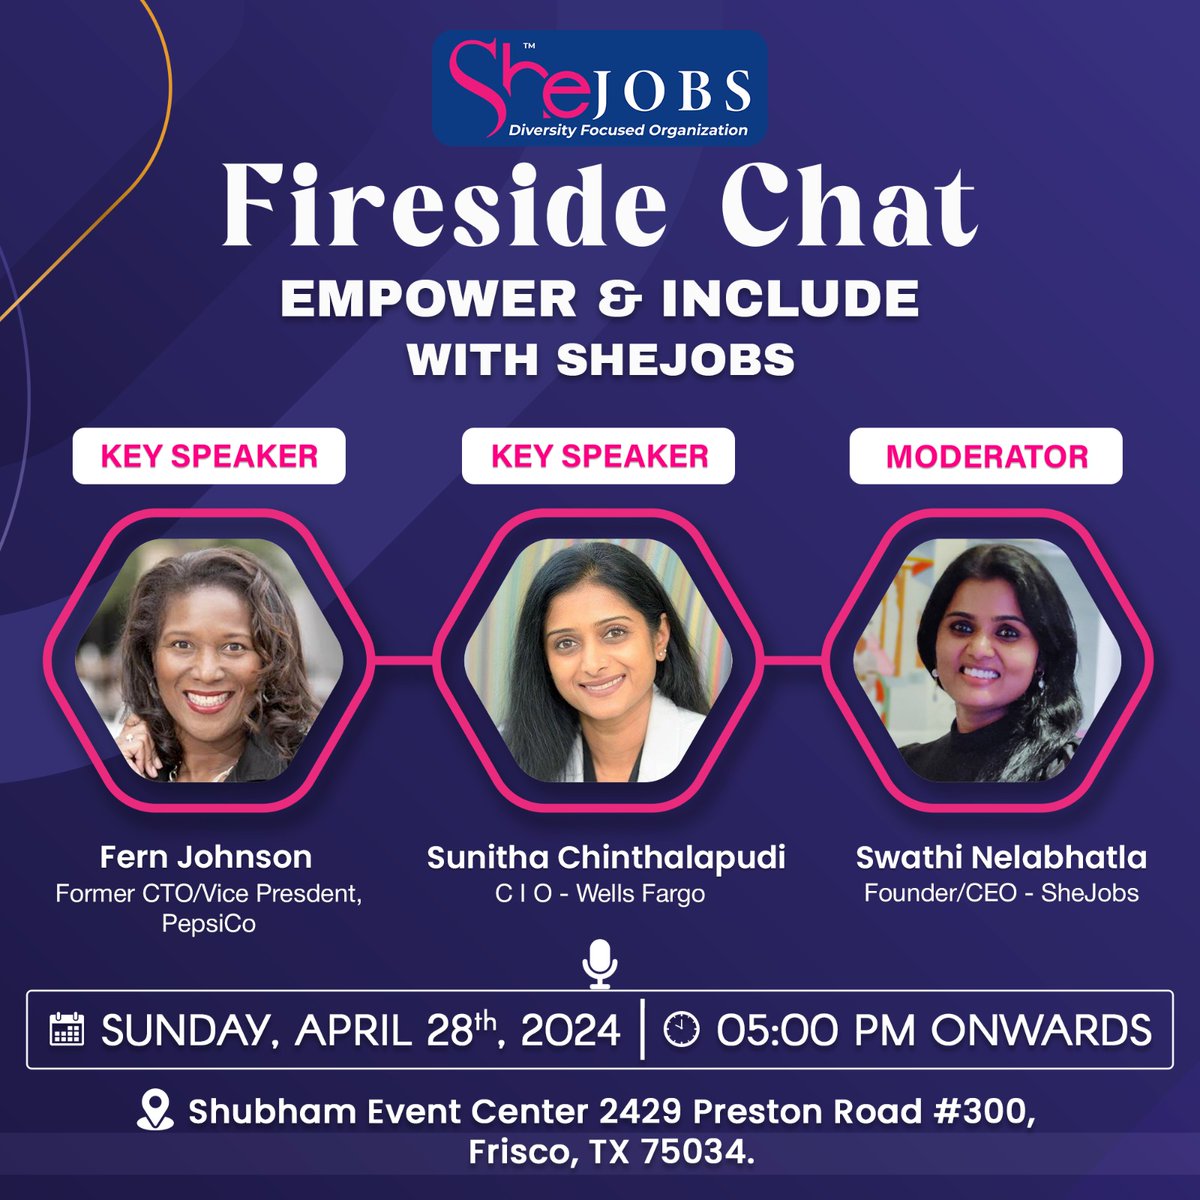 Get ready for an insightful fireside chat at 'Empower and Include' event! Our professional fireside chat will feature guest speakers Fern Johnson and Sunitha Chinthalapudi, moderated by SheJobs Founder Swathi Nelabhatla. Let's come together for an inclusive conversation! In